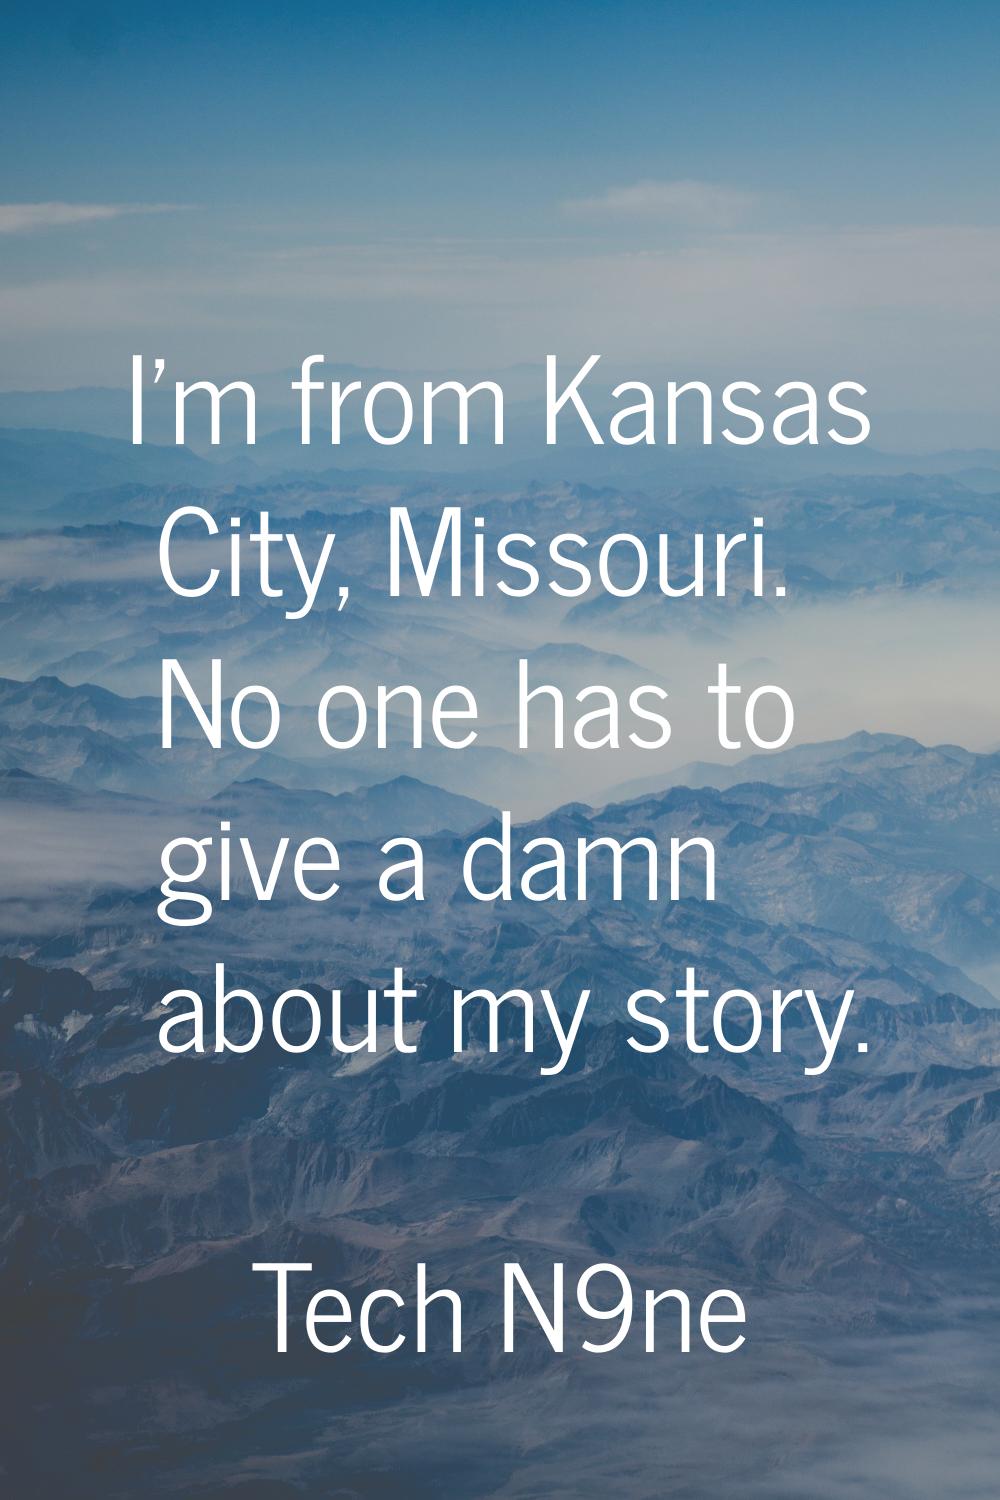 I'm from Kansas City, Missouri. No one has to give a damn about my story.